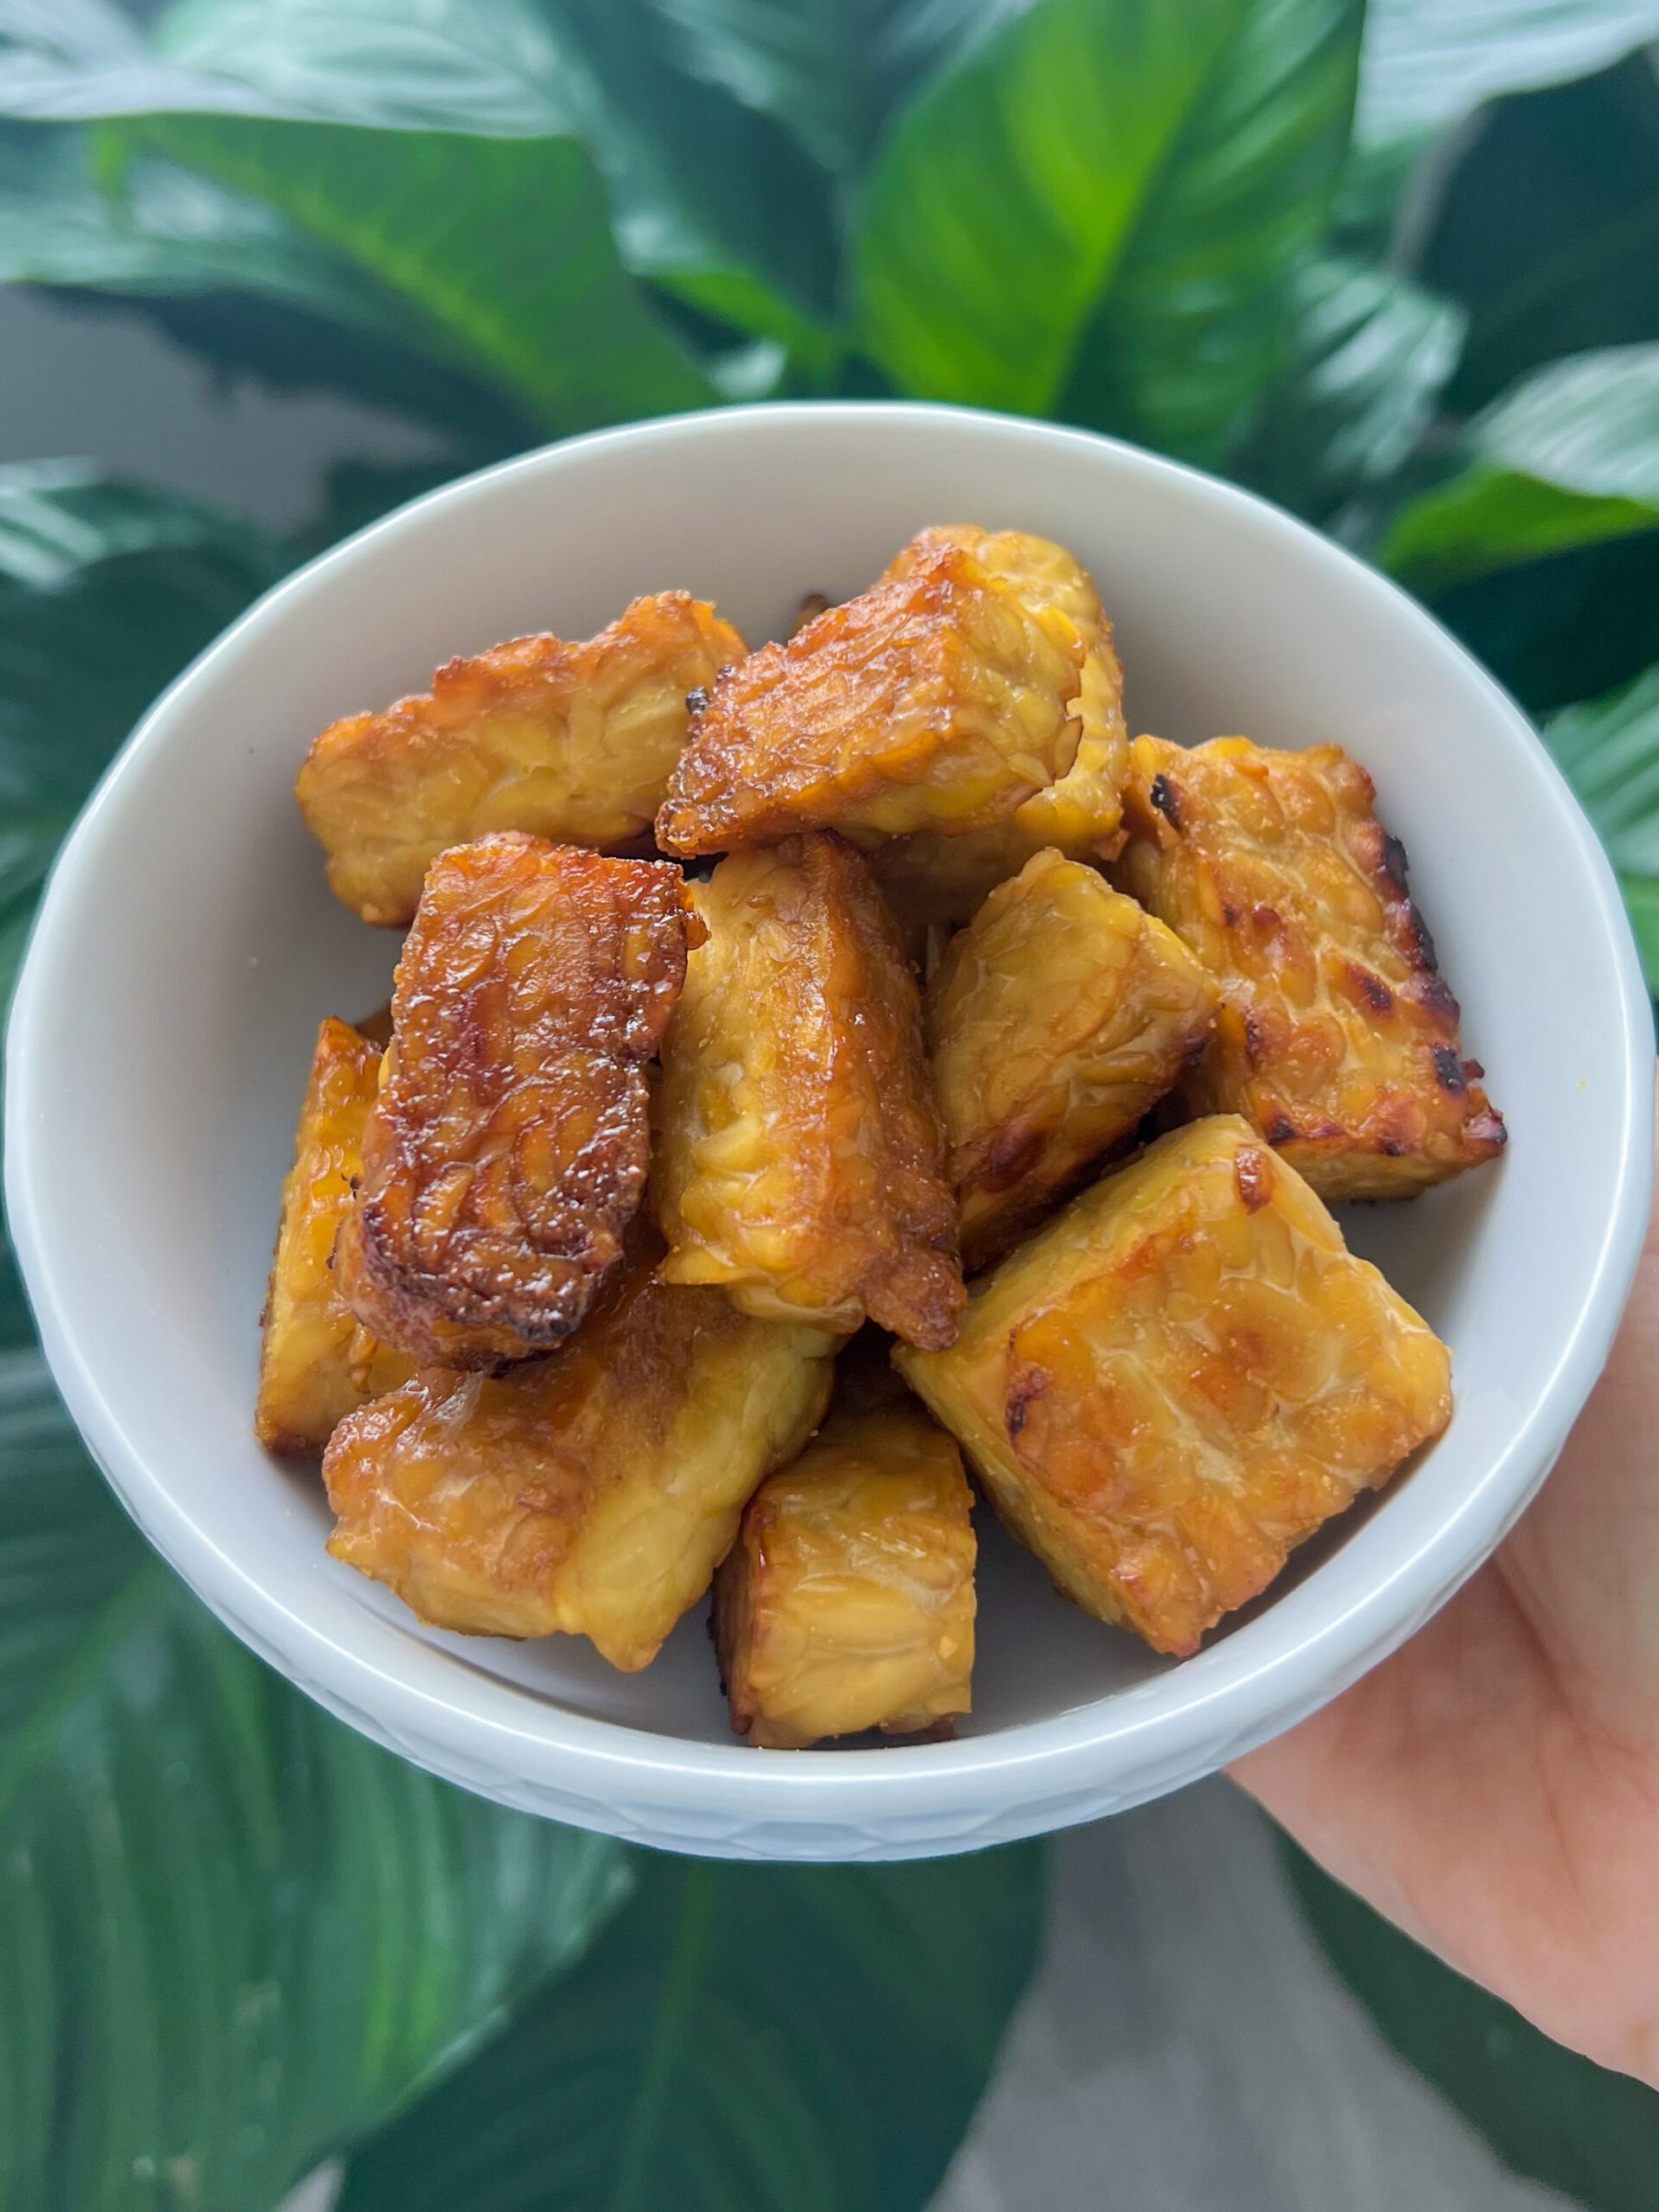 If you're looking to add more plant-based protein to your diet, this Simple Baked Tempeh Recipe has your name on it! It uses simple ingredients that you probably already have on hand and is made in minutes. Tempeh is a lesser known vegan protein made from pressed soybeans. It is versatile and will go well on any vegan lunch or dinner. It's also just a great snack because these crispy, golden, and flavorful bites of tempeh are the best! This is my favorite simple tempeh recipe and it's so delicious!